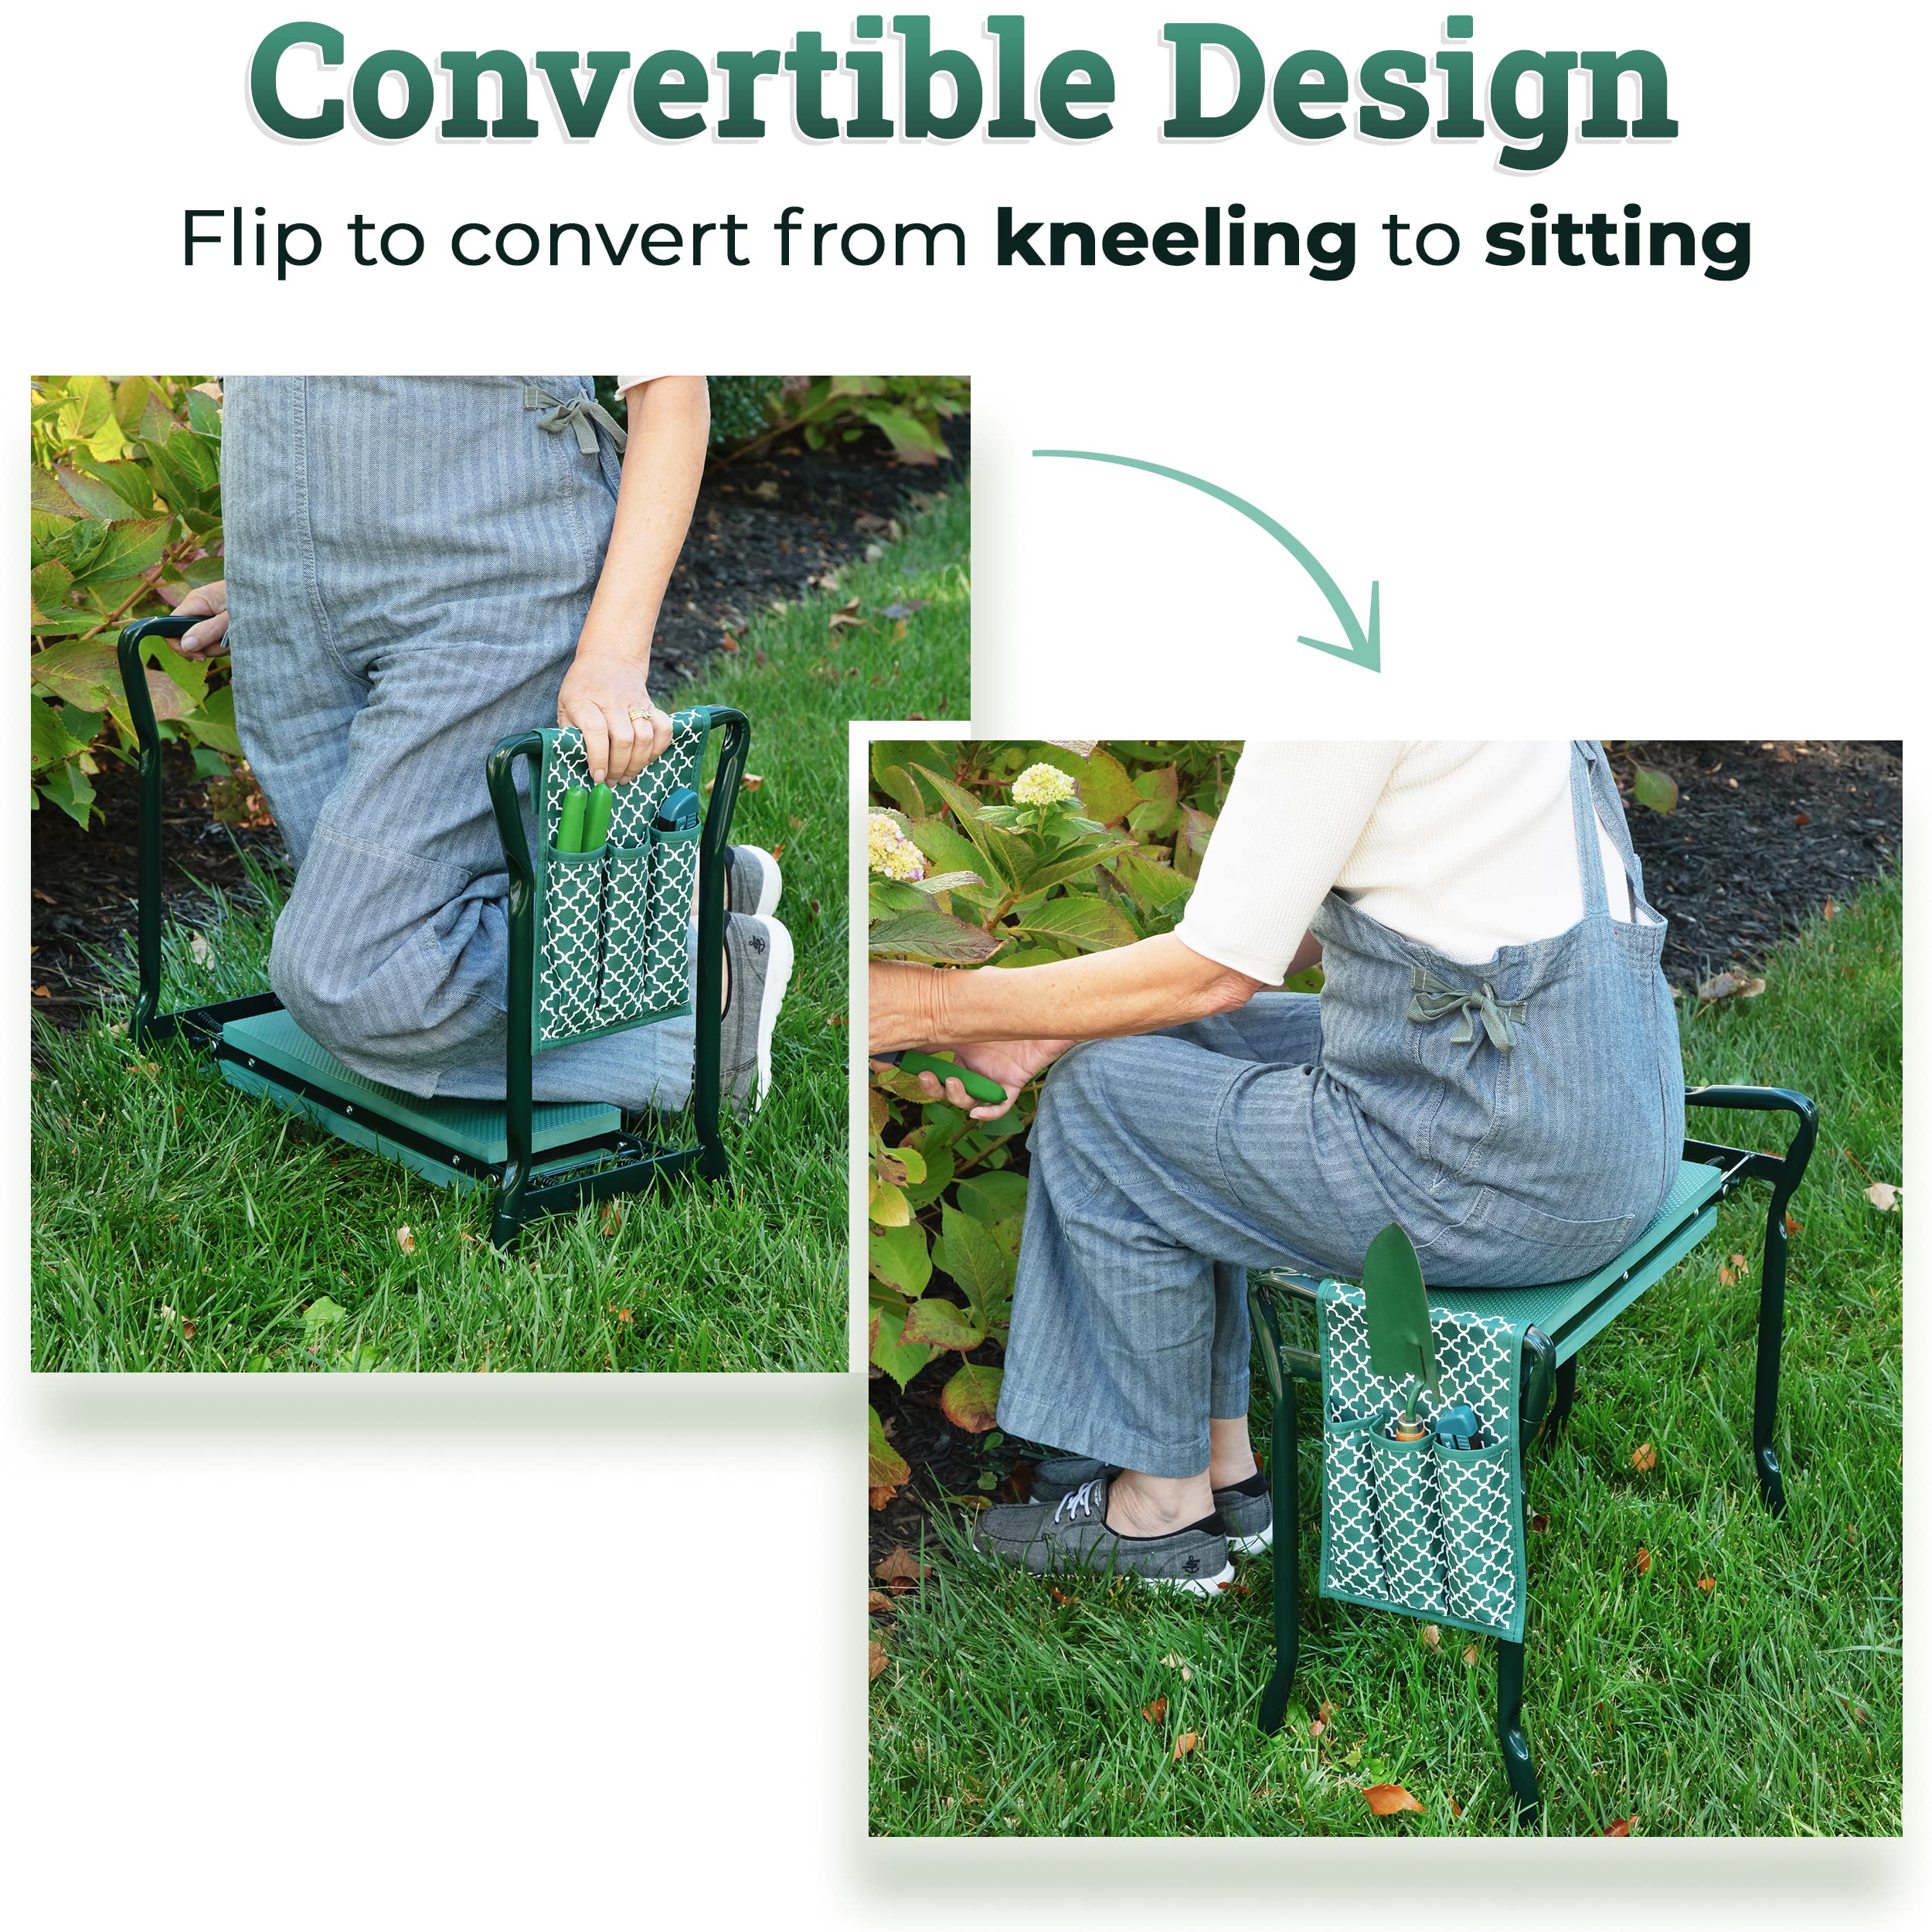 Garden Kneeler and Seat - Protects Knees, Clothes From Dirt and Grass Stains - Foldable Stool For Easy Storage - EVA Foam Pad -Sturdy, Lightweight Bench with Designed Tool Pouch -Free Gloves Included  - Very Good